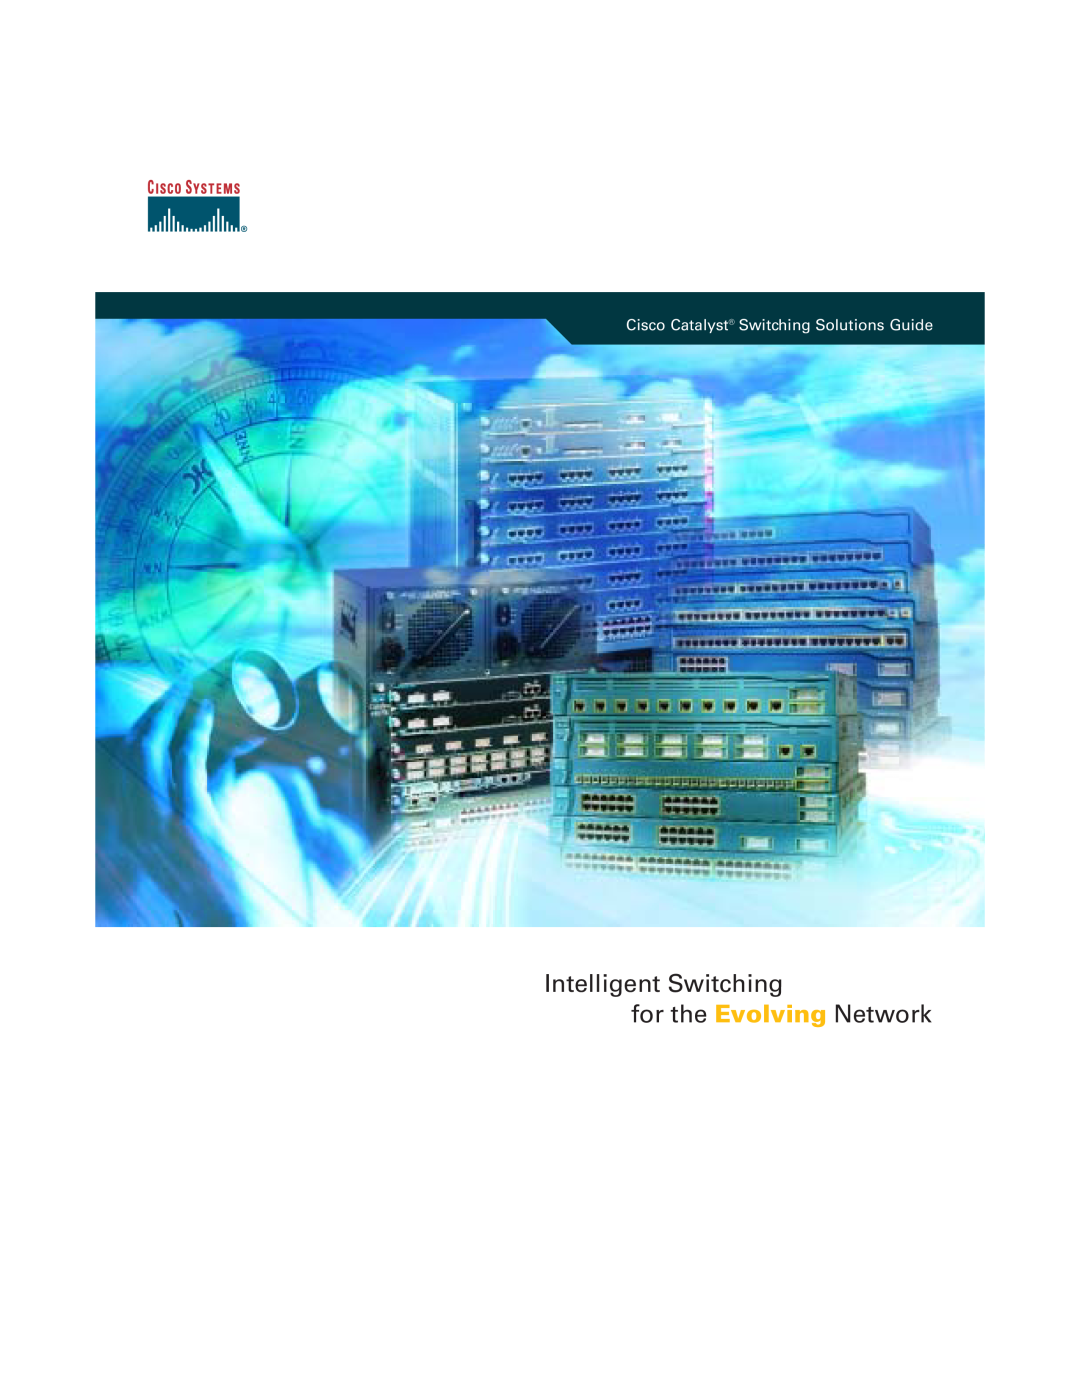 Cisco Systems manual Intelligent Switching for the Evolving Network, Cisco Catalyst Switching Solutions Guide 